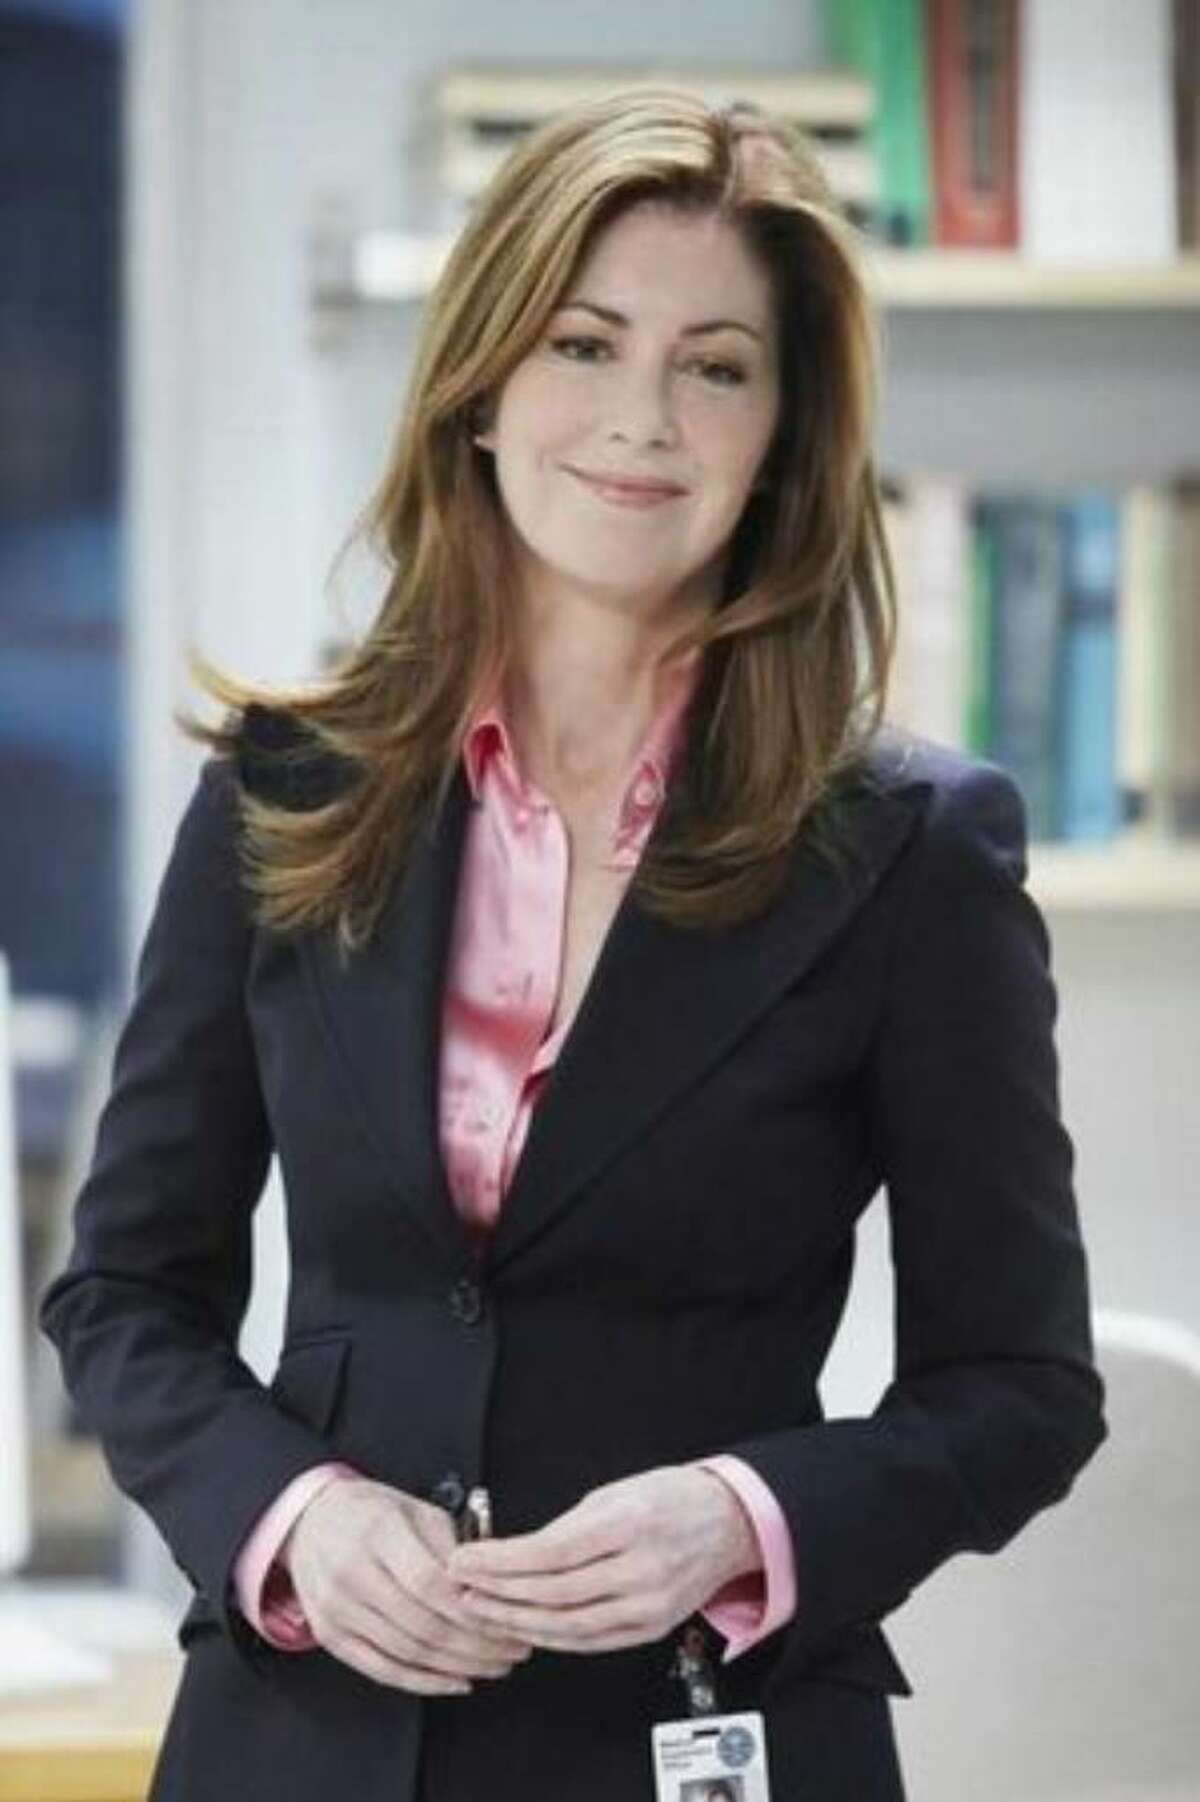 Dr. Megan Hunt (Dana Delany) was in a class of her own, a brilliant neurosurgeon at the top of her game. But her world is turned upside down when a devastating car accident puts an end to her time in the operating room. Megan resumes her career as a medical examiner, determined to solve the puzzle of who or what killed the victims. "Body of Proof" is from ABC Studios. Christopher Murphey wrote the pilot, which was directed by Nelson McCormick. Murphey and Matt Gross serve as executive producers.